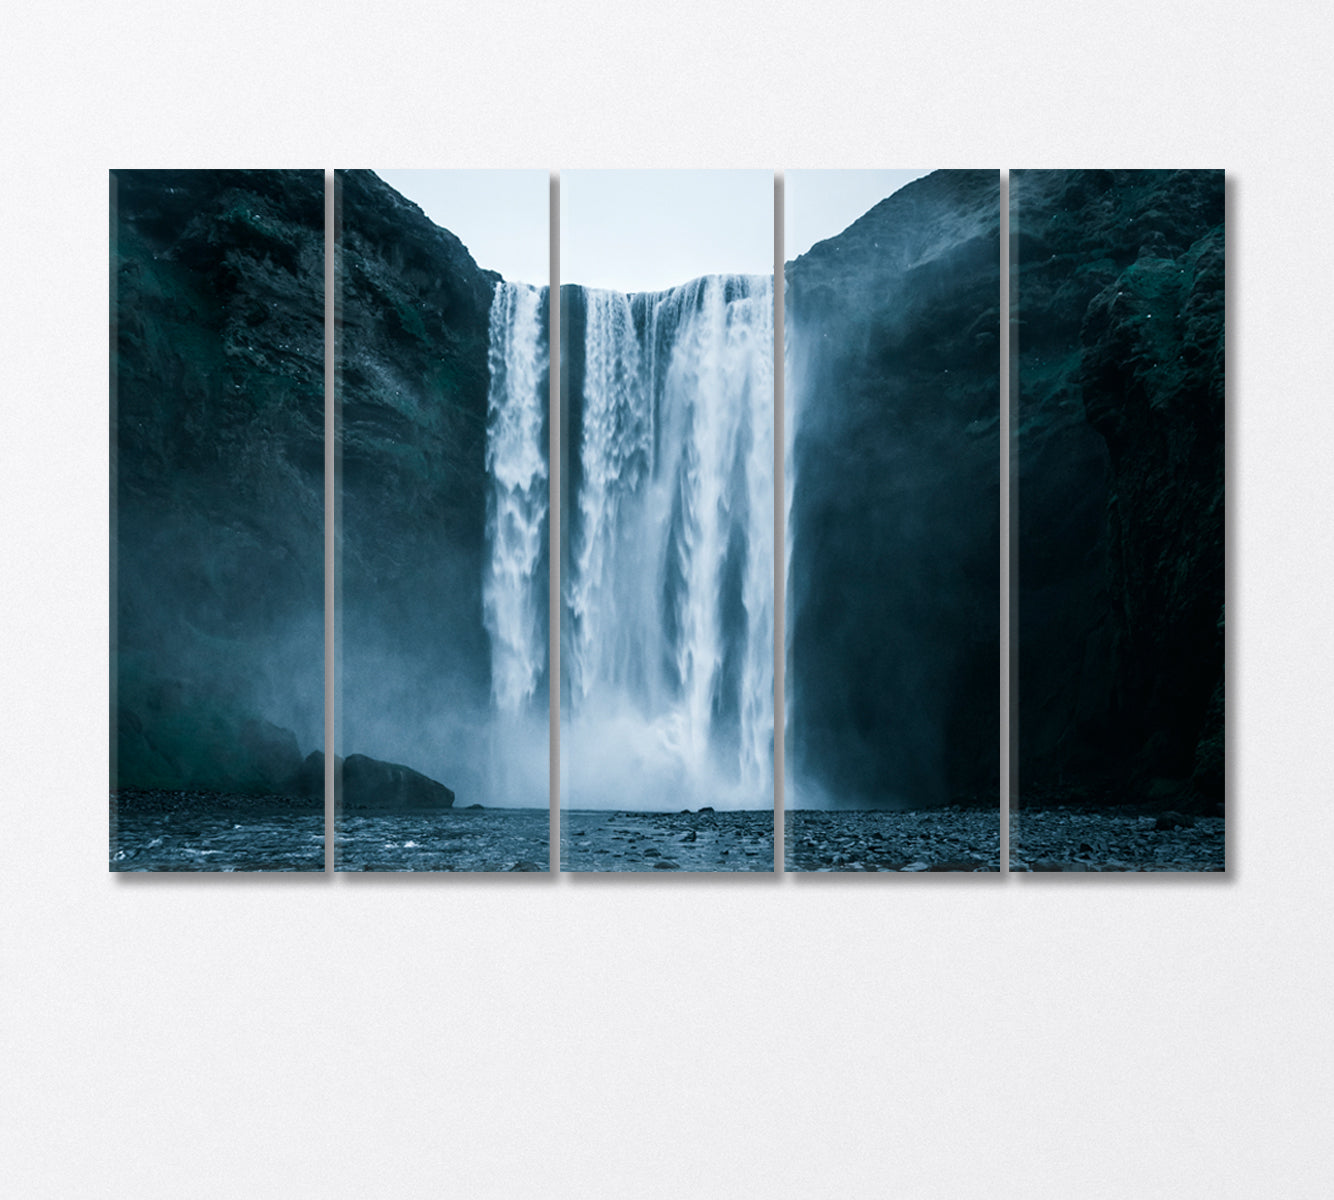 Famous Skogafoss Waterfall in Iceland Canvas Print-Canvas Print-CetArt-5 Panels-36x24 inches-CetArt